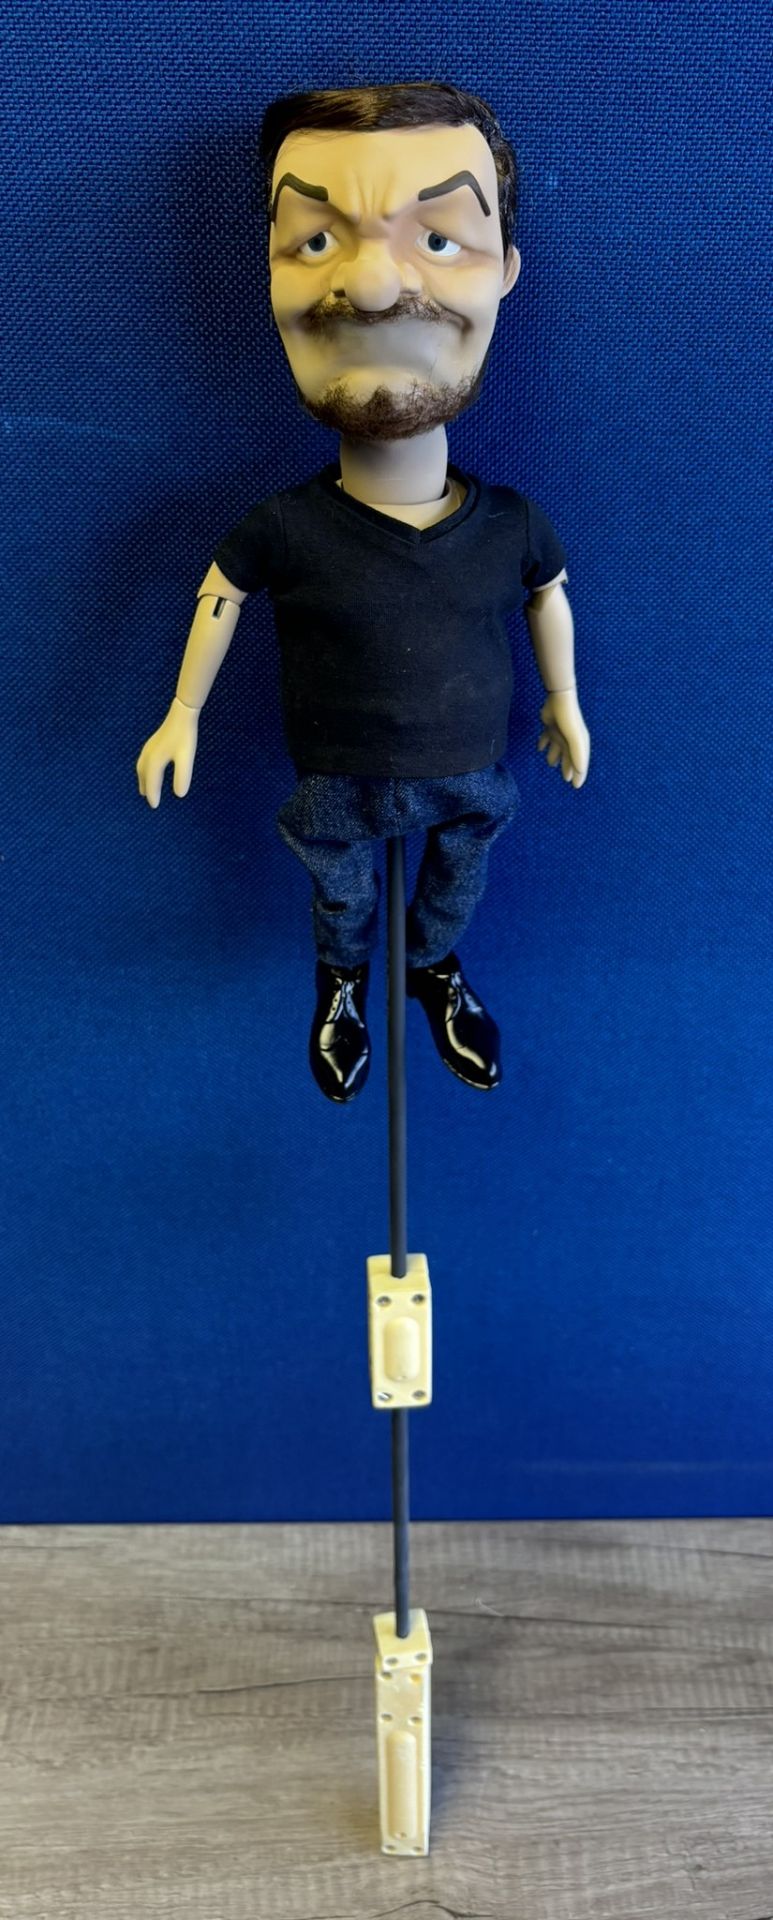 Newzoid puppet - Ricky Gervais - Image 2 of 2